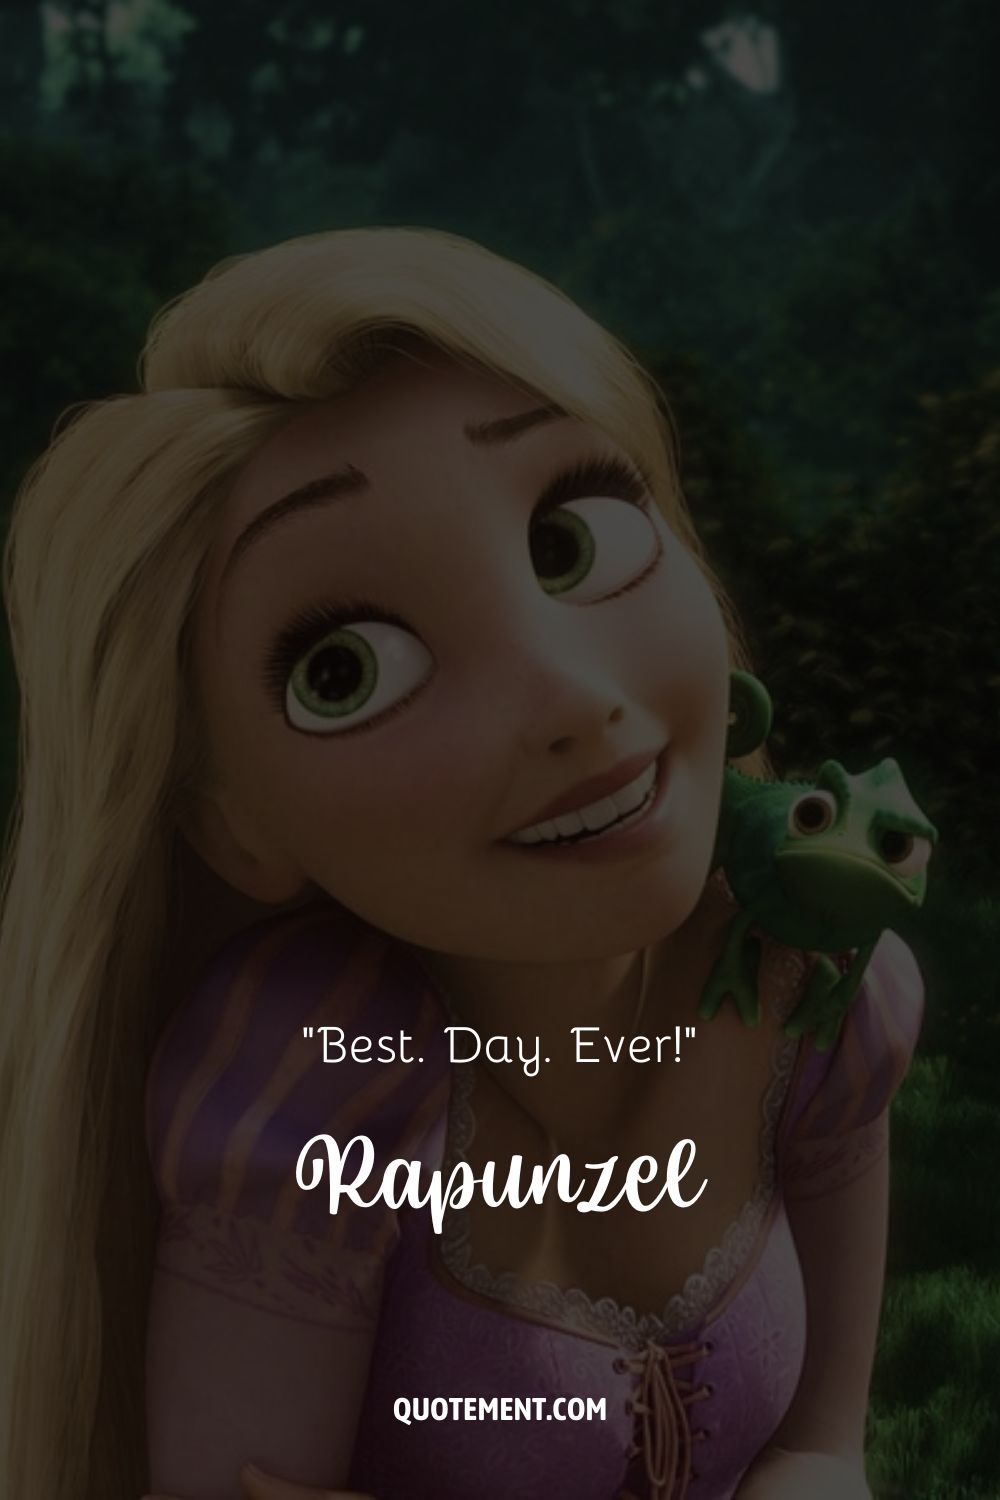 rapuzel and her chameleon representing cute tangled quote